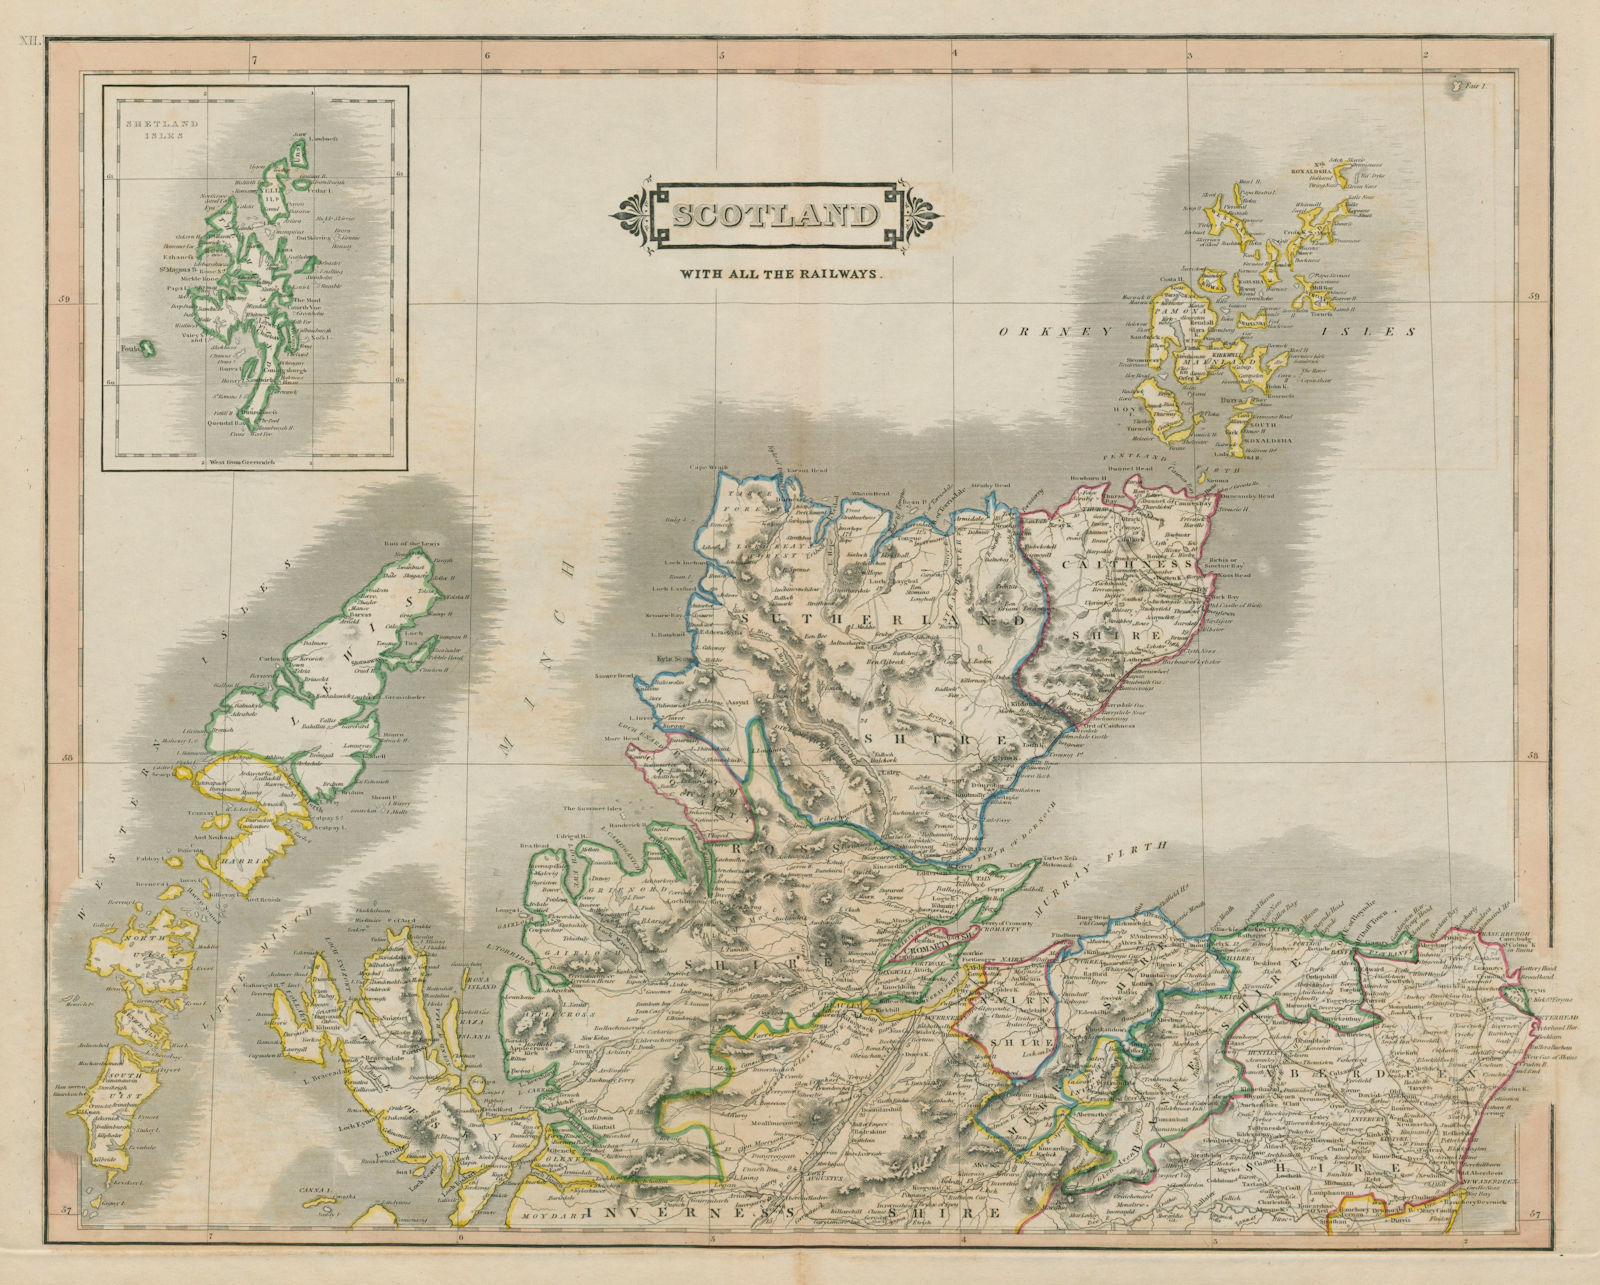 Northern Scotland with all the railways. LIZARS 1842 old antique map chart